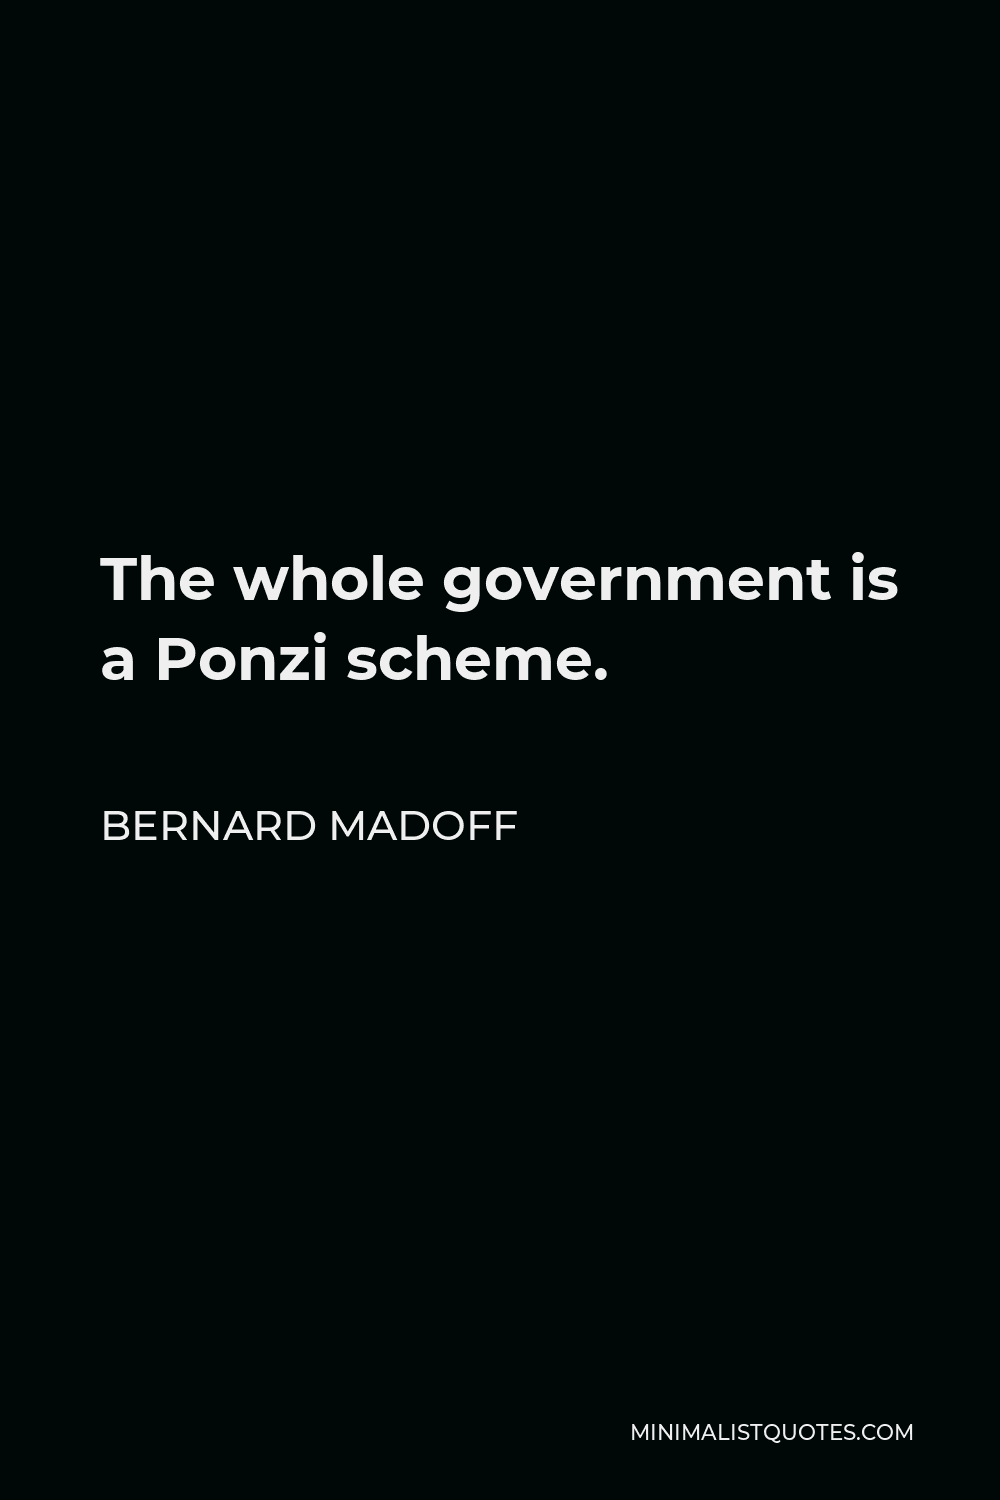 Bernard Madoff Quote - The whole government is a Ponzi scheme.